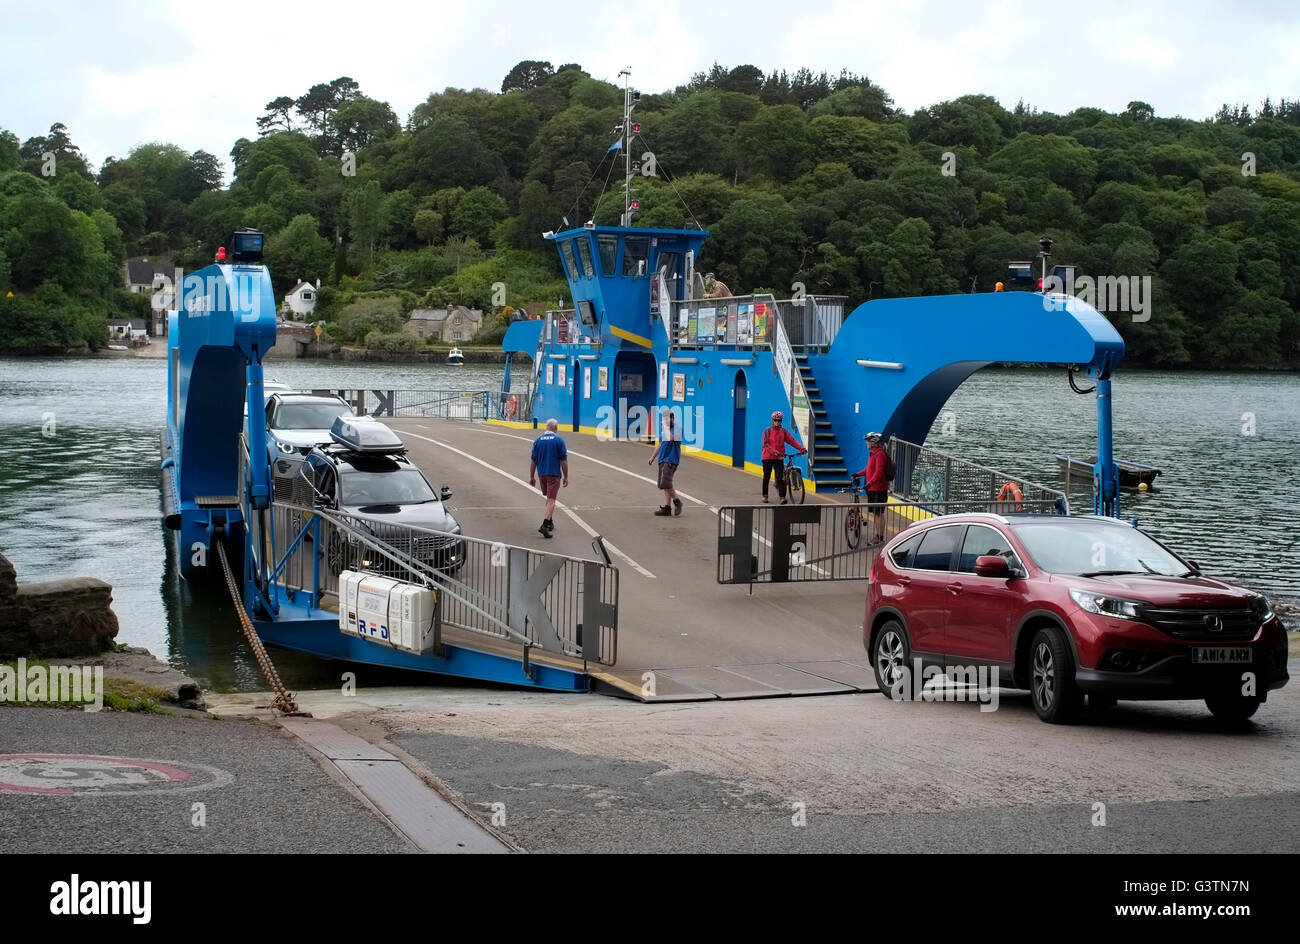 The King Harry Ferry crosses the Fal River, in Cornwall, Britain June 14, 2016. Copyright photograph - John Voos Stock Photo